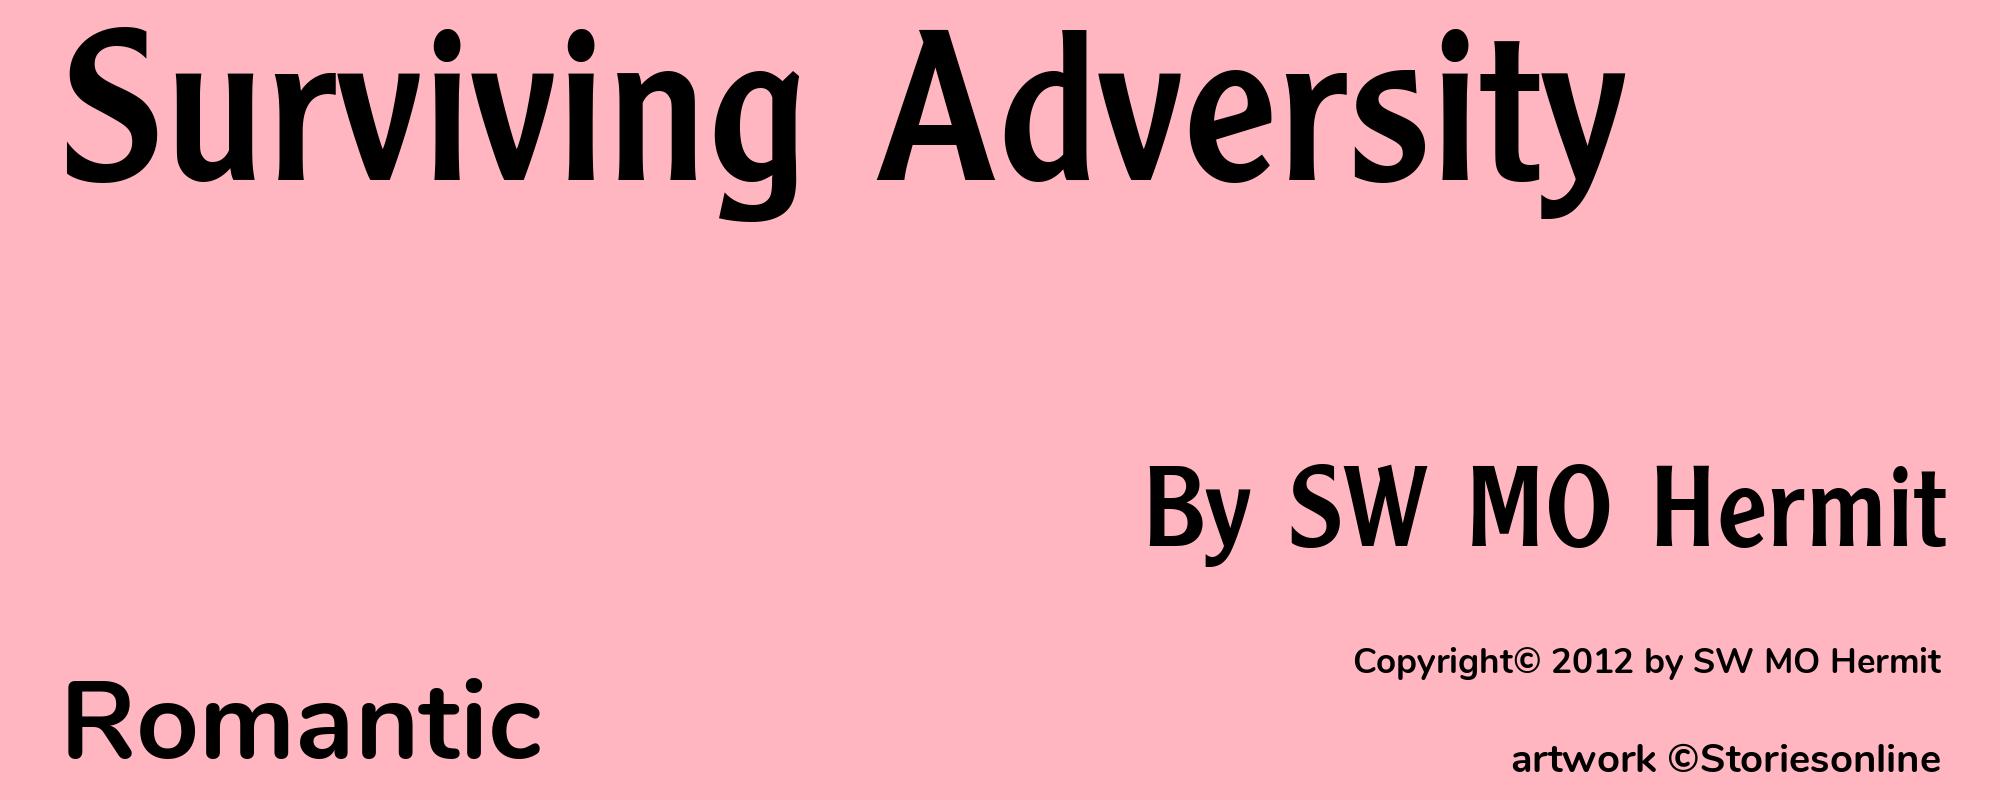 Surviving Adversity - Cover